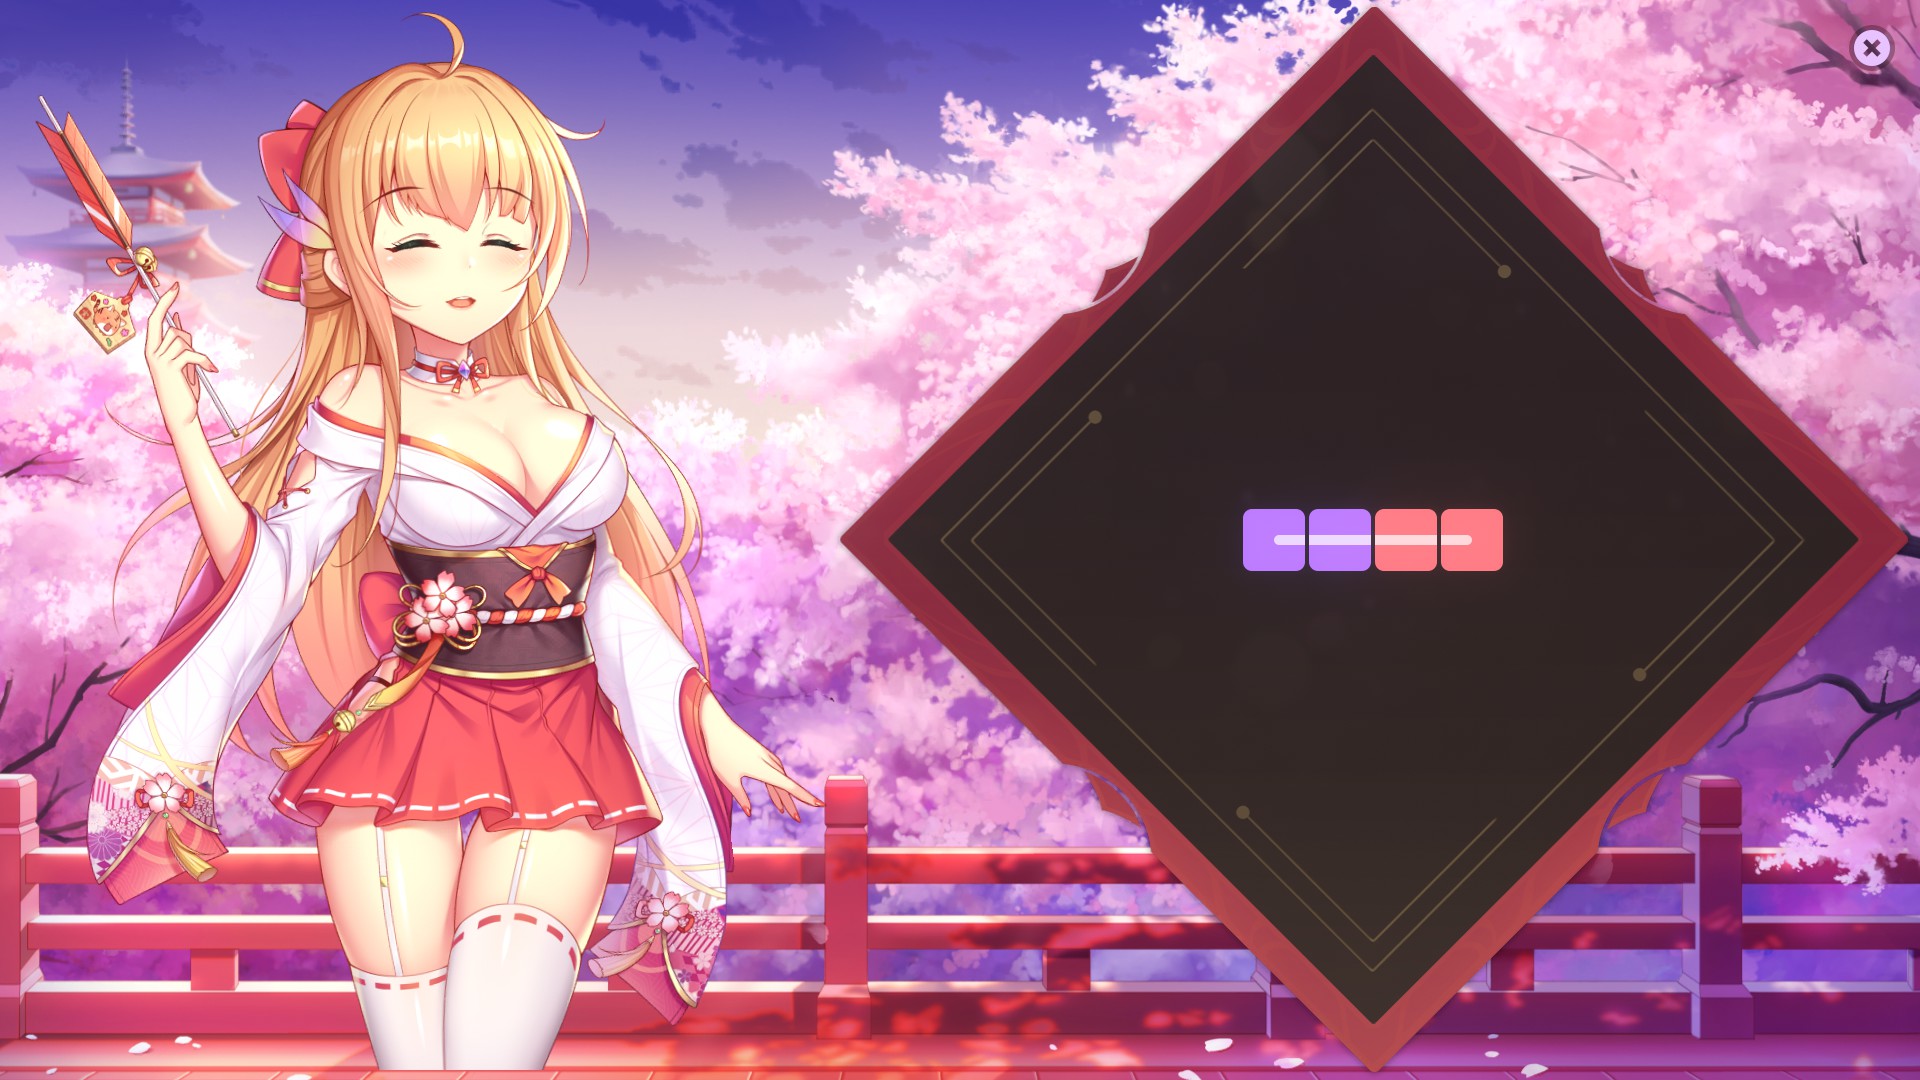 Sakura Hime 2 Achievement Guide - Images of completed levels - CF97FB6